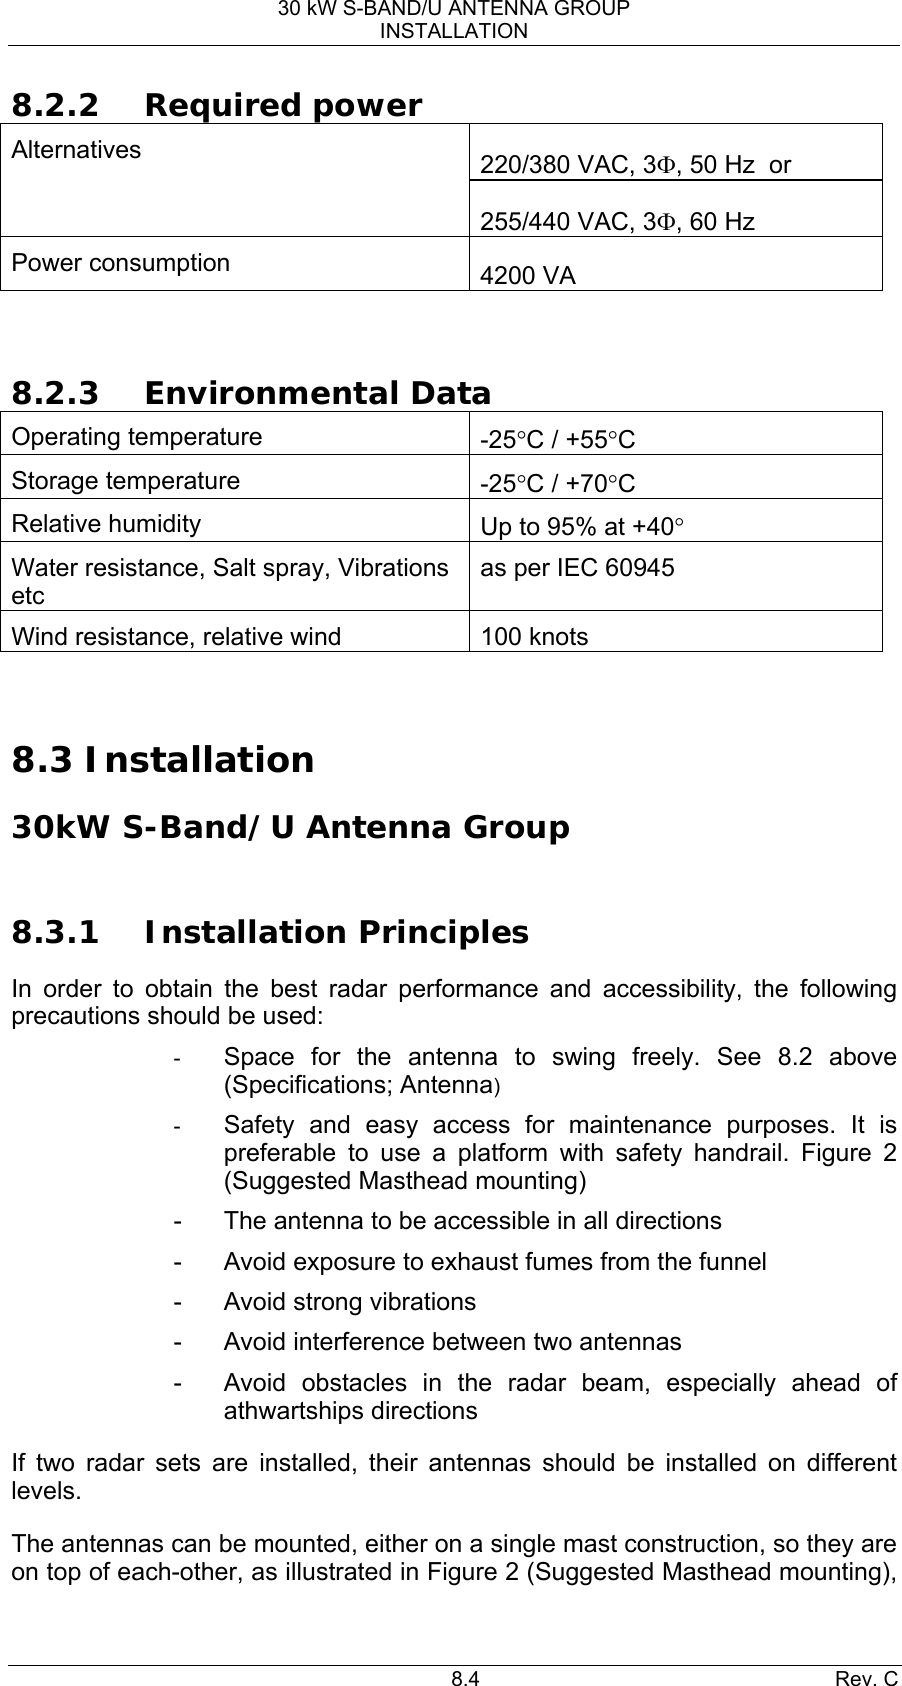 30 kW S-BAND/U ANTENNA GROUP INSTALLATION 8.4 Rev. C 8.2.2 Required power 220/380 VAC, 3Φ, 50 Hz  or Alternatives 255/440 VAC, 3Φ, 60 Hz Power consumption       4200 VA   8.2.3 Environmental Data Operating temperature      -25°C / +55°C Storage temperature    -25°C / +70°C Relative humidity  Up to 95% at +40° Water resistance, Salt spray, Vibrations etc  as per IEC 60945 Wind resistance, relative wind  100 knots   8.3 Installation  30kW S-Band/U Antenna Group   8.3.1 Installation Principles In order to obtain the best radar performance and accessibility, the following precautions should be used: -  Space for the antenna to swing freely. See 8.2 above  (Specifications; Antenna) -  Safety and easy access for maintenance purposes. It is preferable to use a platform with safety handrail. Figure 2 (Suggested Masthead mounting) -  The antenna to be accessible in all directions -  Avoid exposure to exhaust fumes from the funnel -  Avoid strong vibrations -  Avoid interference between two antennas -  Avoid obstacles in the radar beam, especially ahead of athwartships directions If two radar sets are installed, their antennas should be installed on different levels. The antennas can be mounted, either on a single mast construction, so they are on top of each-other, as illustrated in Figure 2 (Suggested Masthead mounting), 